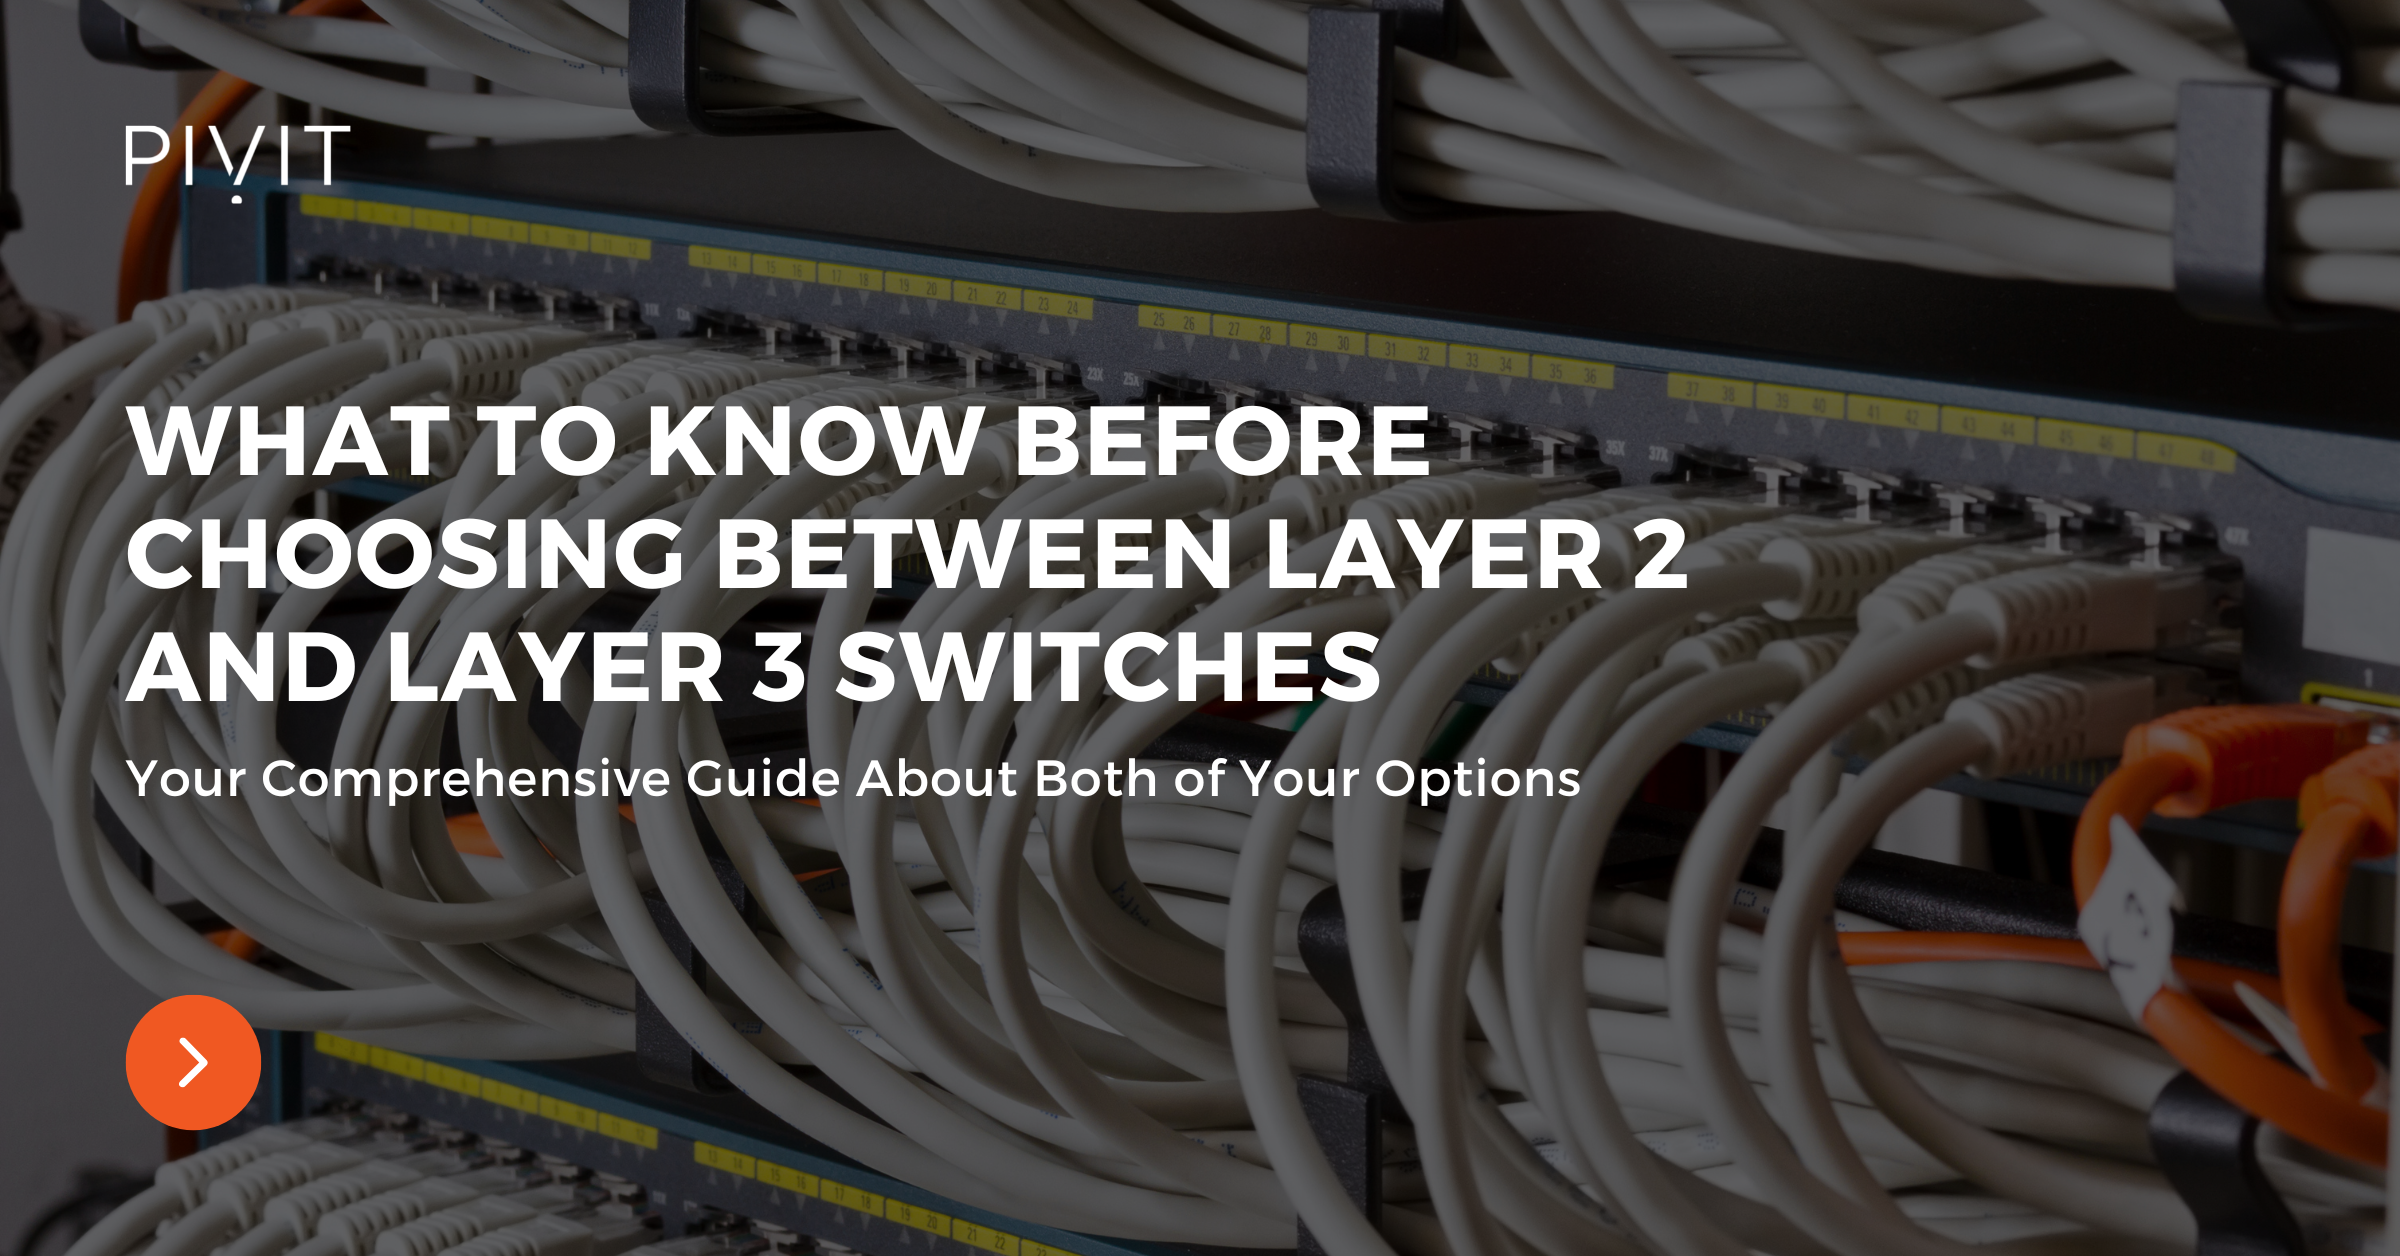 What to Know Before Choosing Between Layer 2 and Layer 3 Switches